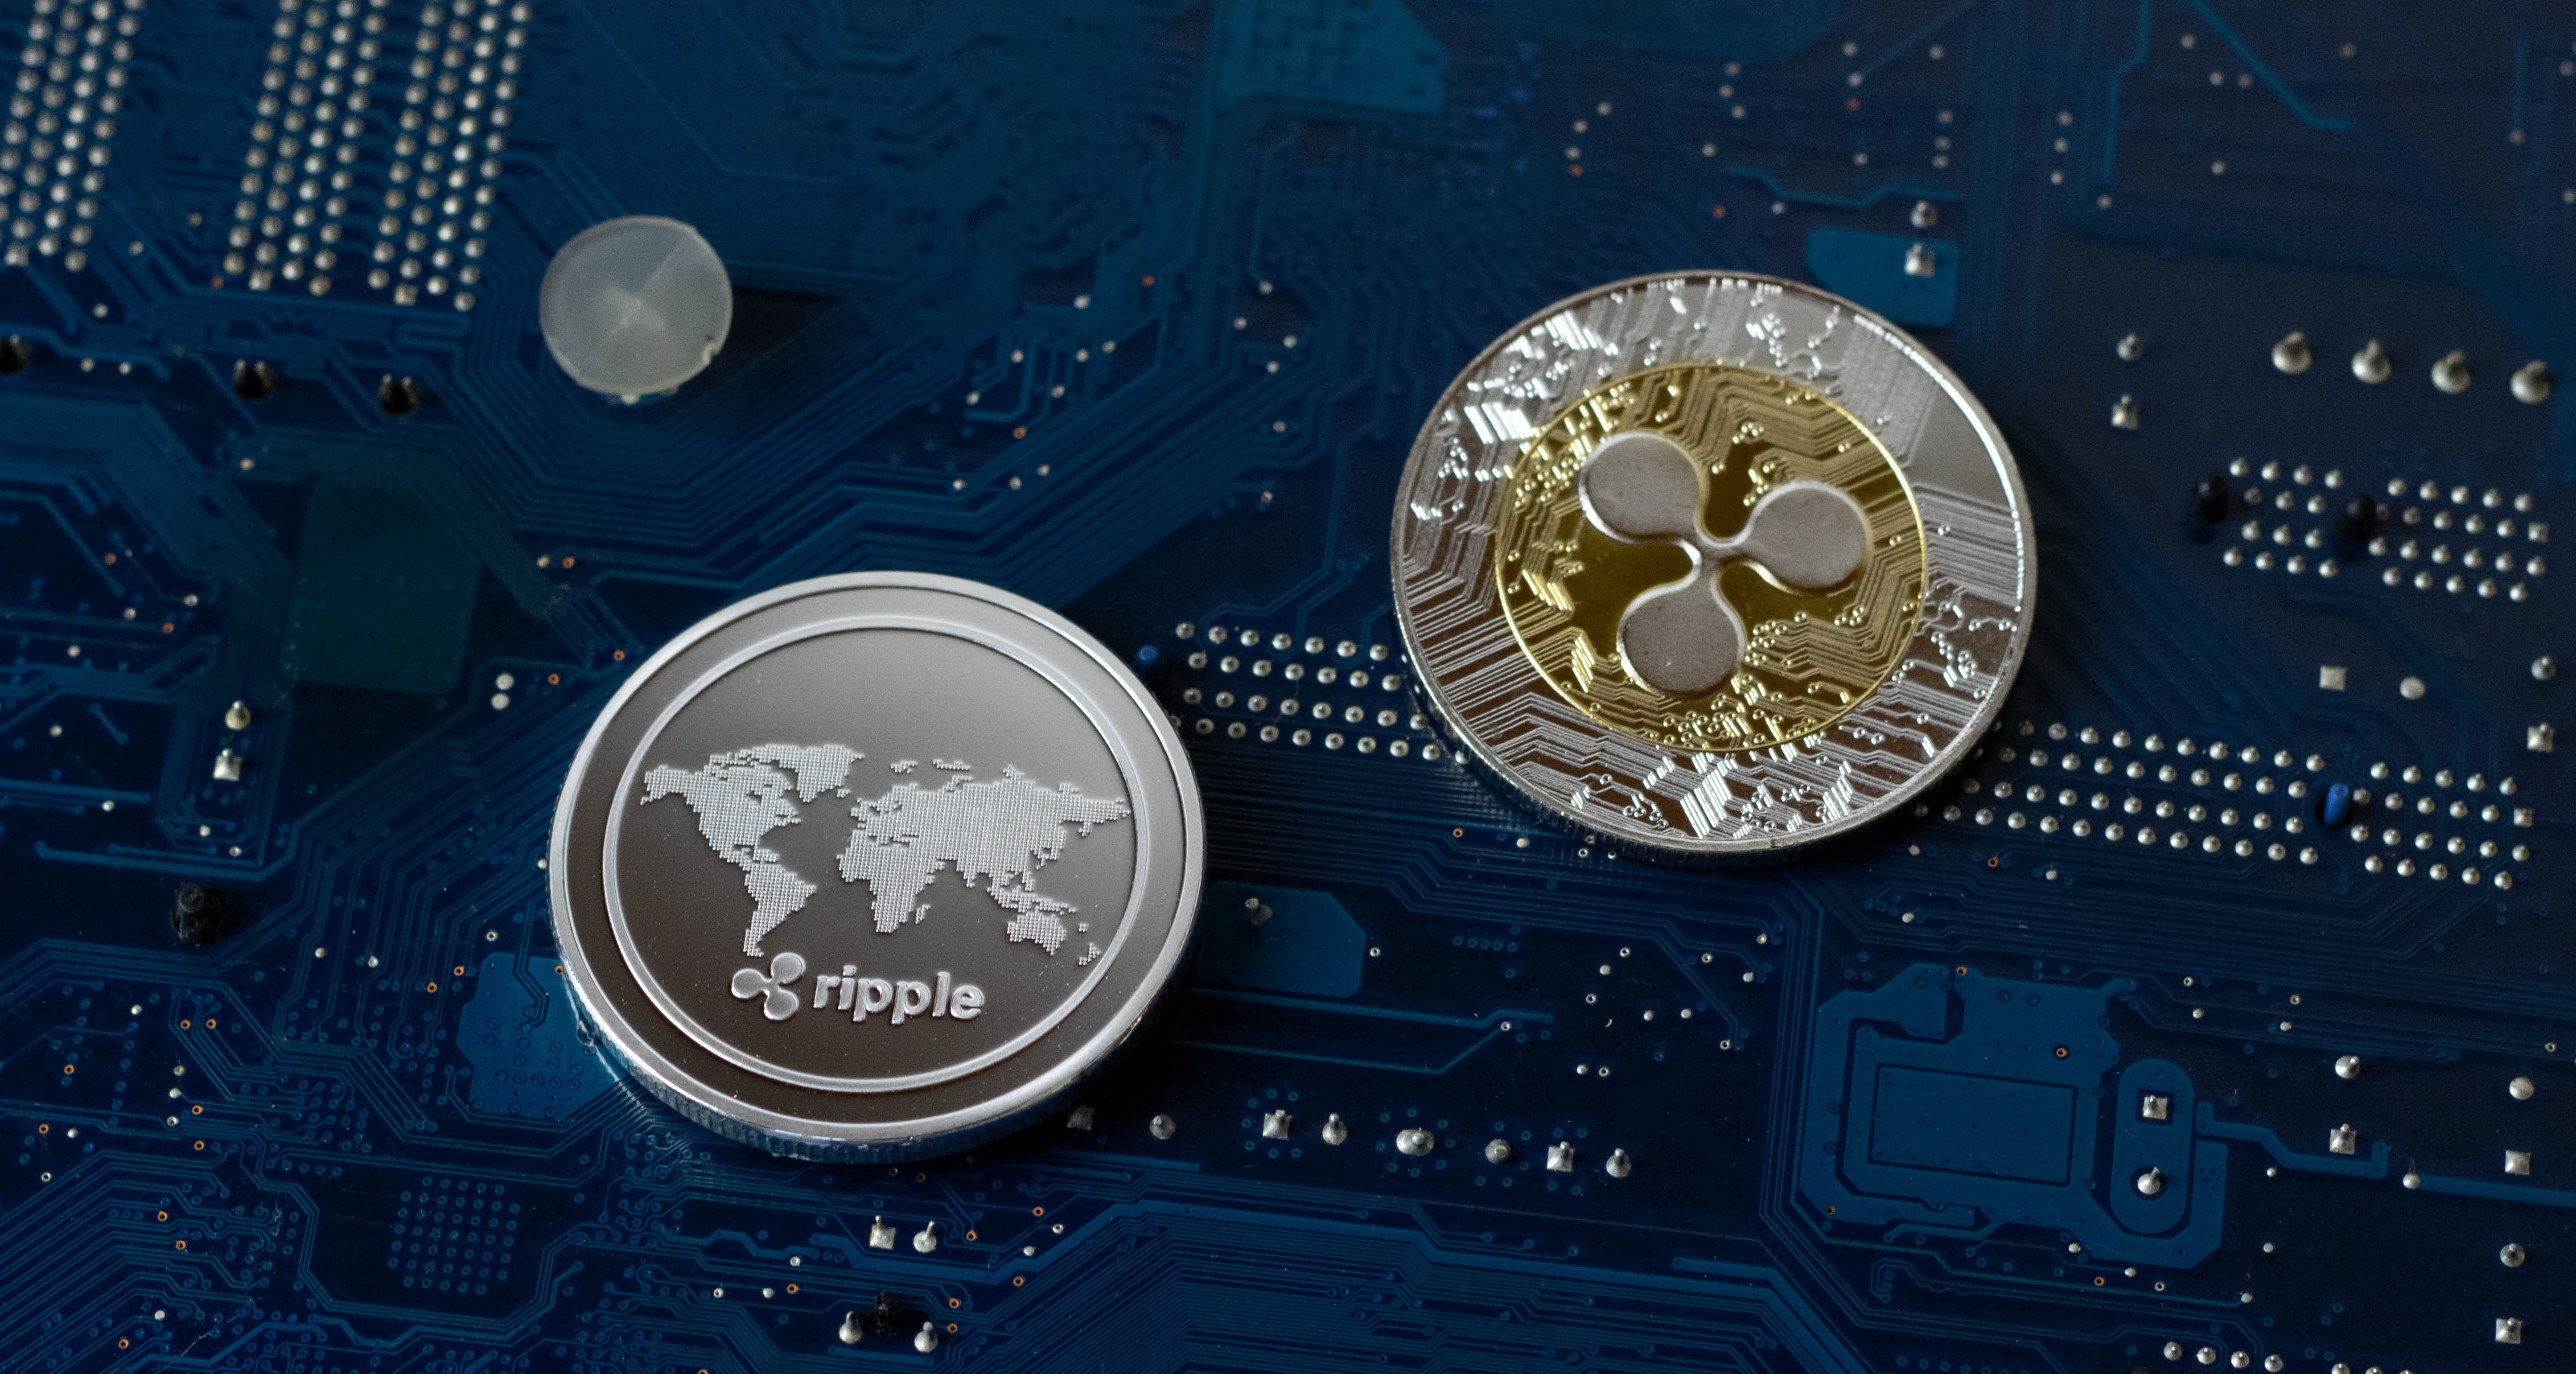 After 12 years, Ripple's president sees its payment and enterprise